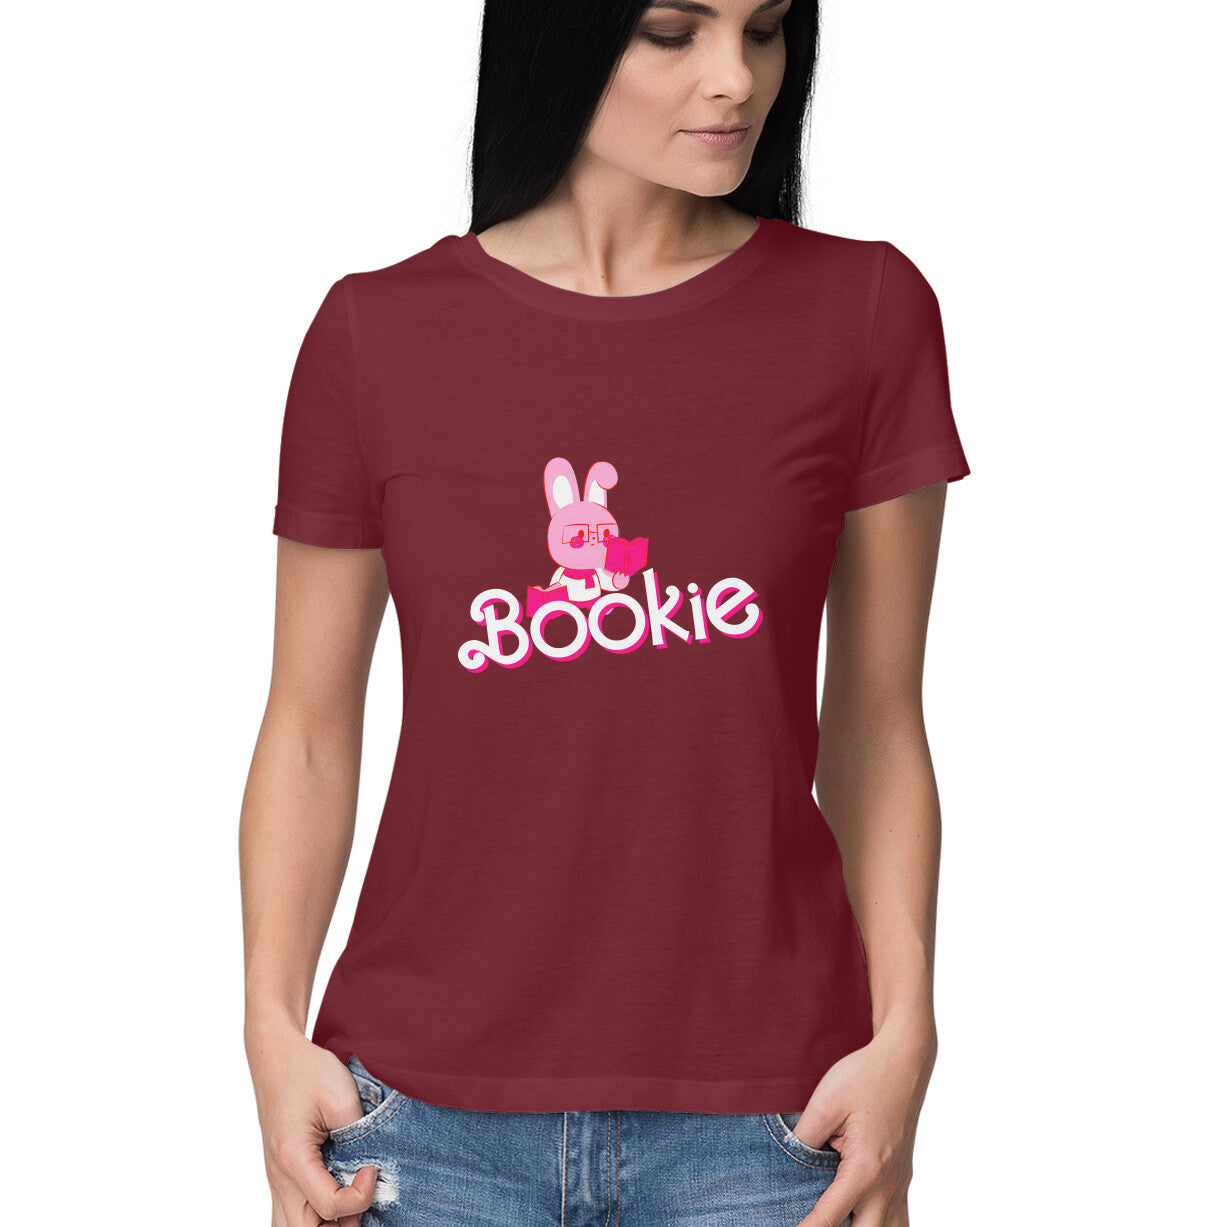 Book Lover's Barbie Tshirt for Bookie-sh Fans